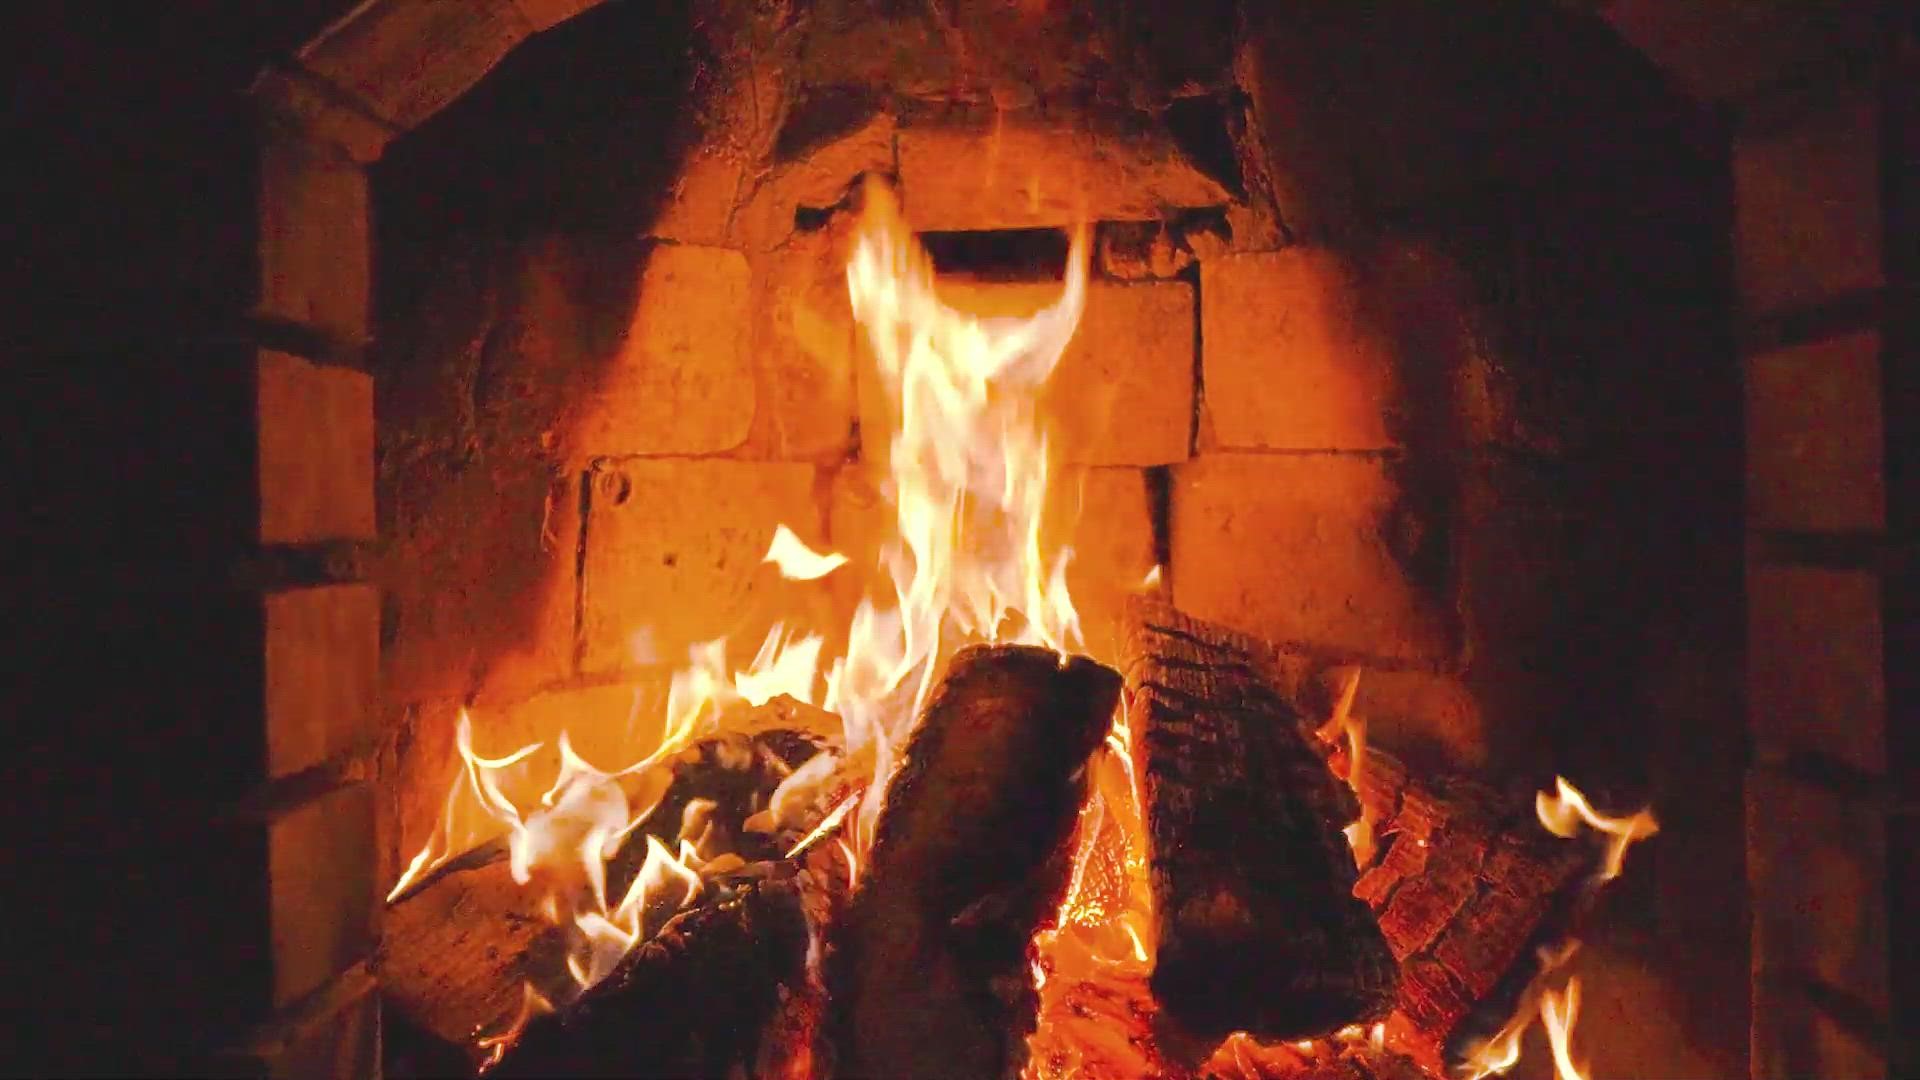 Sit back and enjoy this cozy, crackling fire.